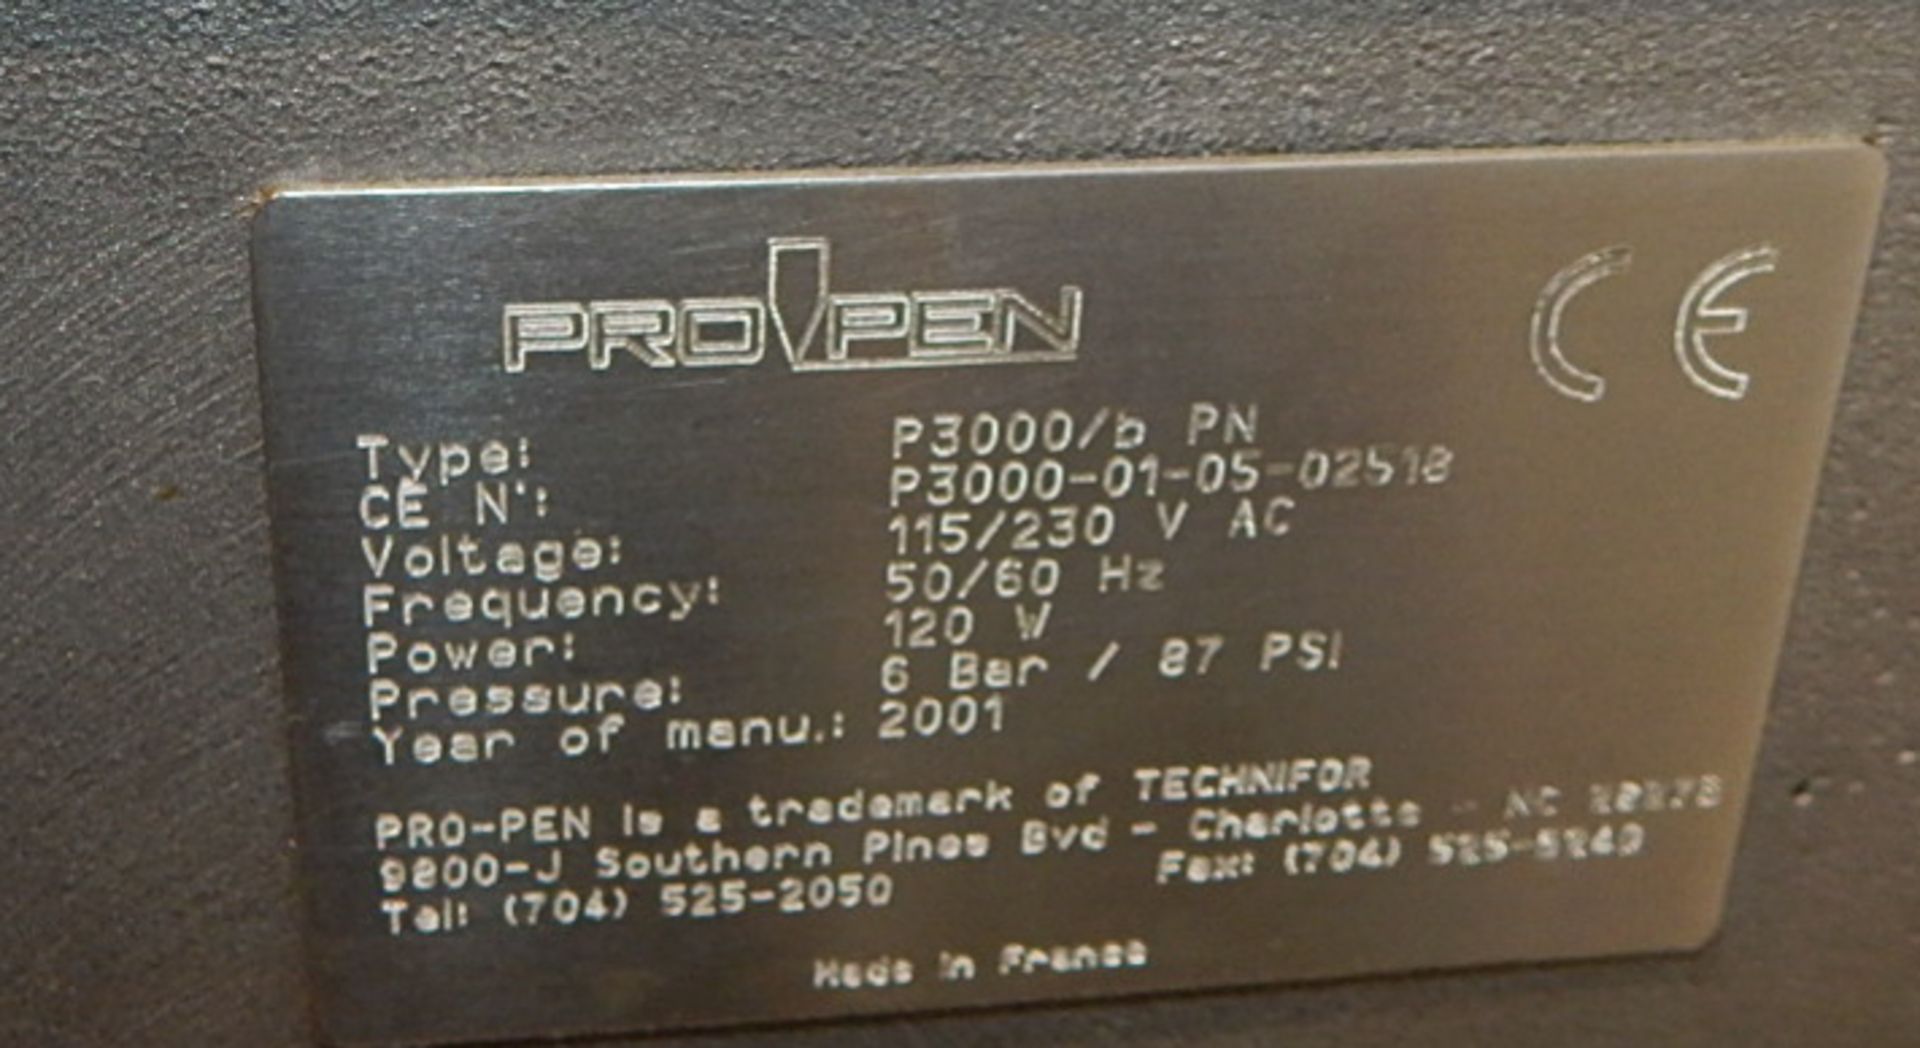 PROPEN P-3000 CNC DOT PEEN PARTS MARKER WITH WINDOWS PC BASED CONTROL, S/N 01-05-02518 - Image 5 of 5